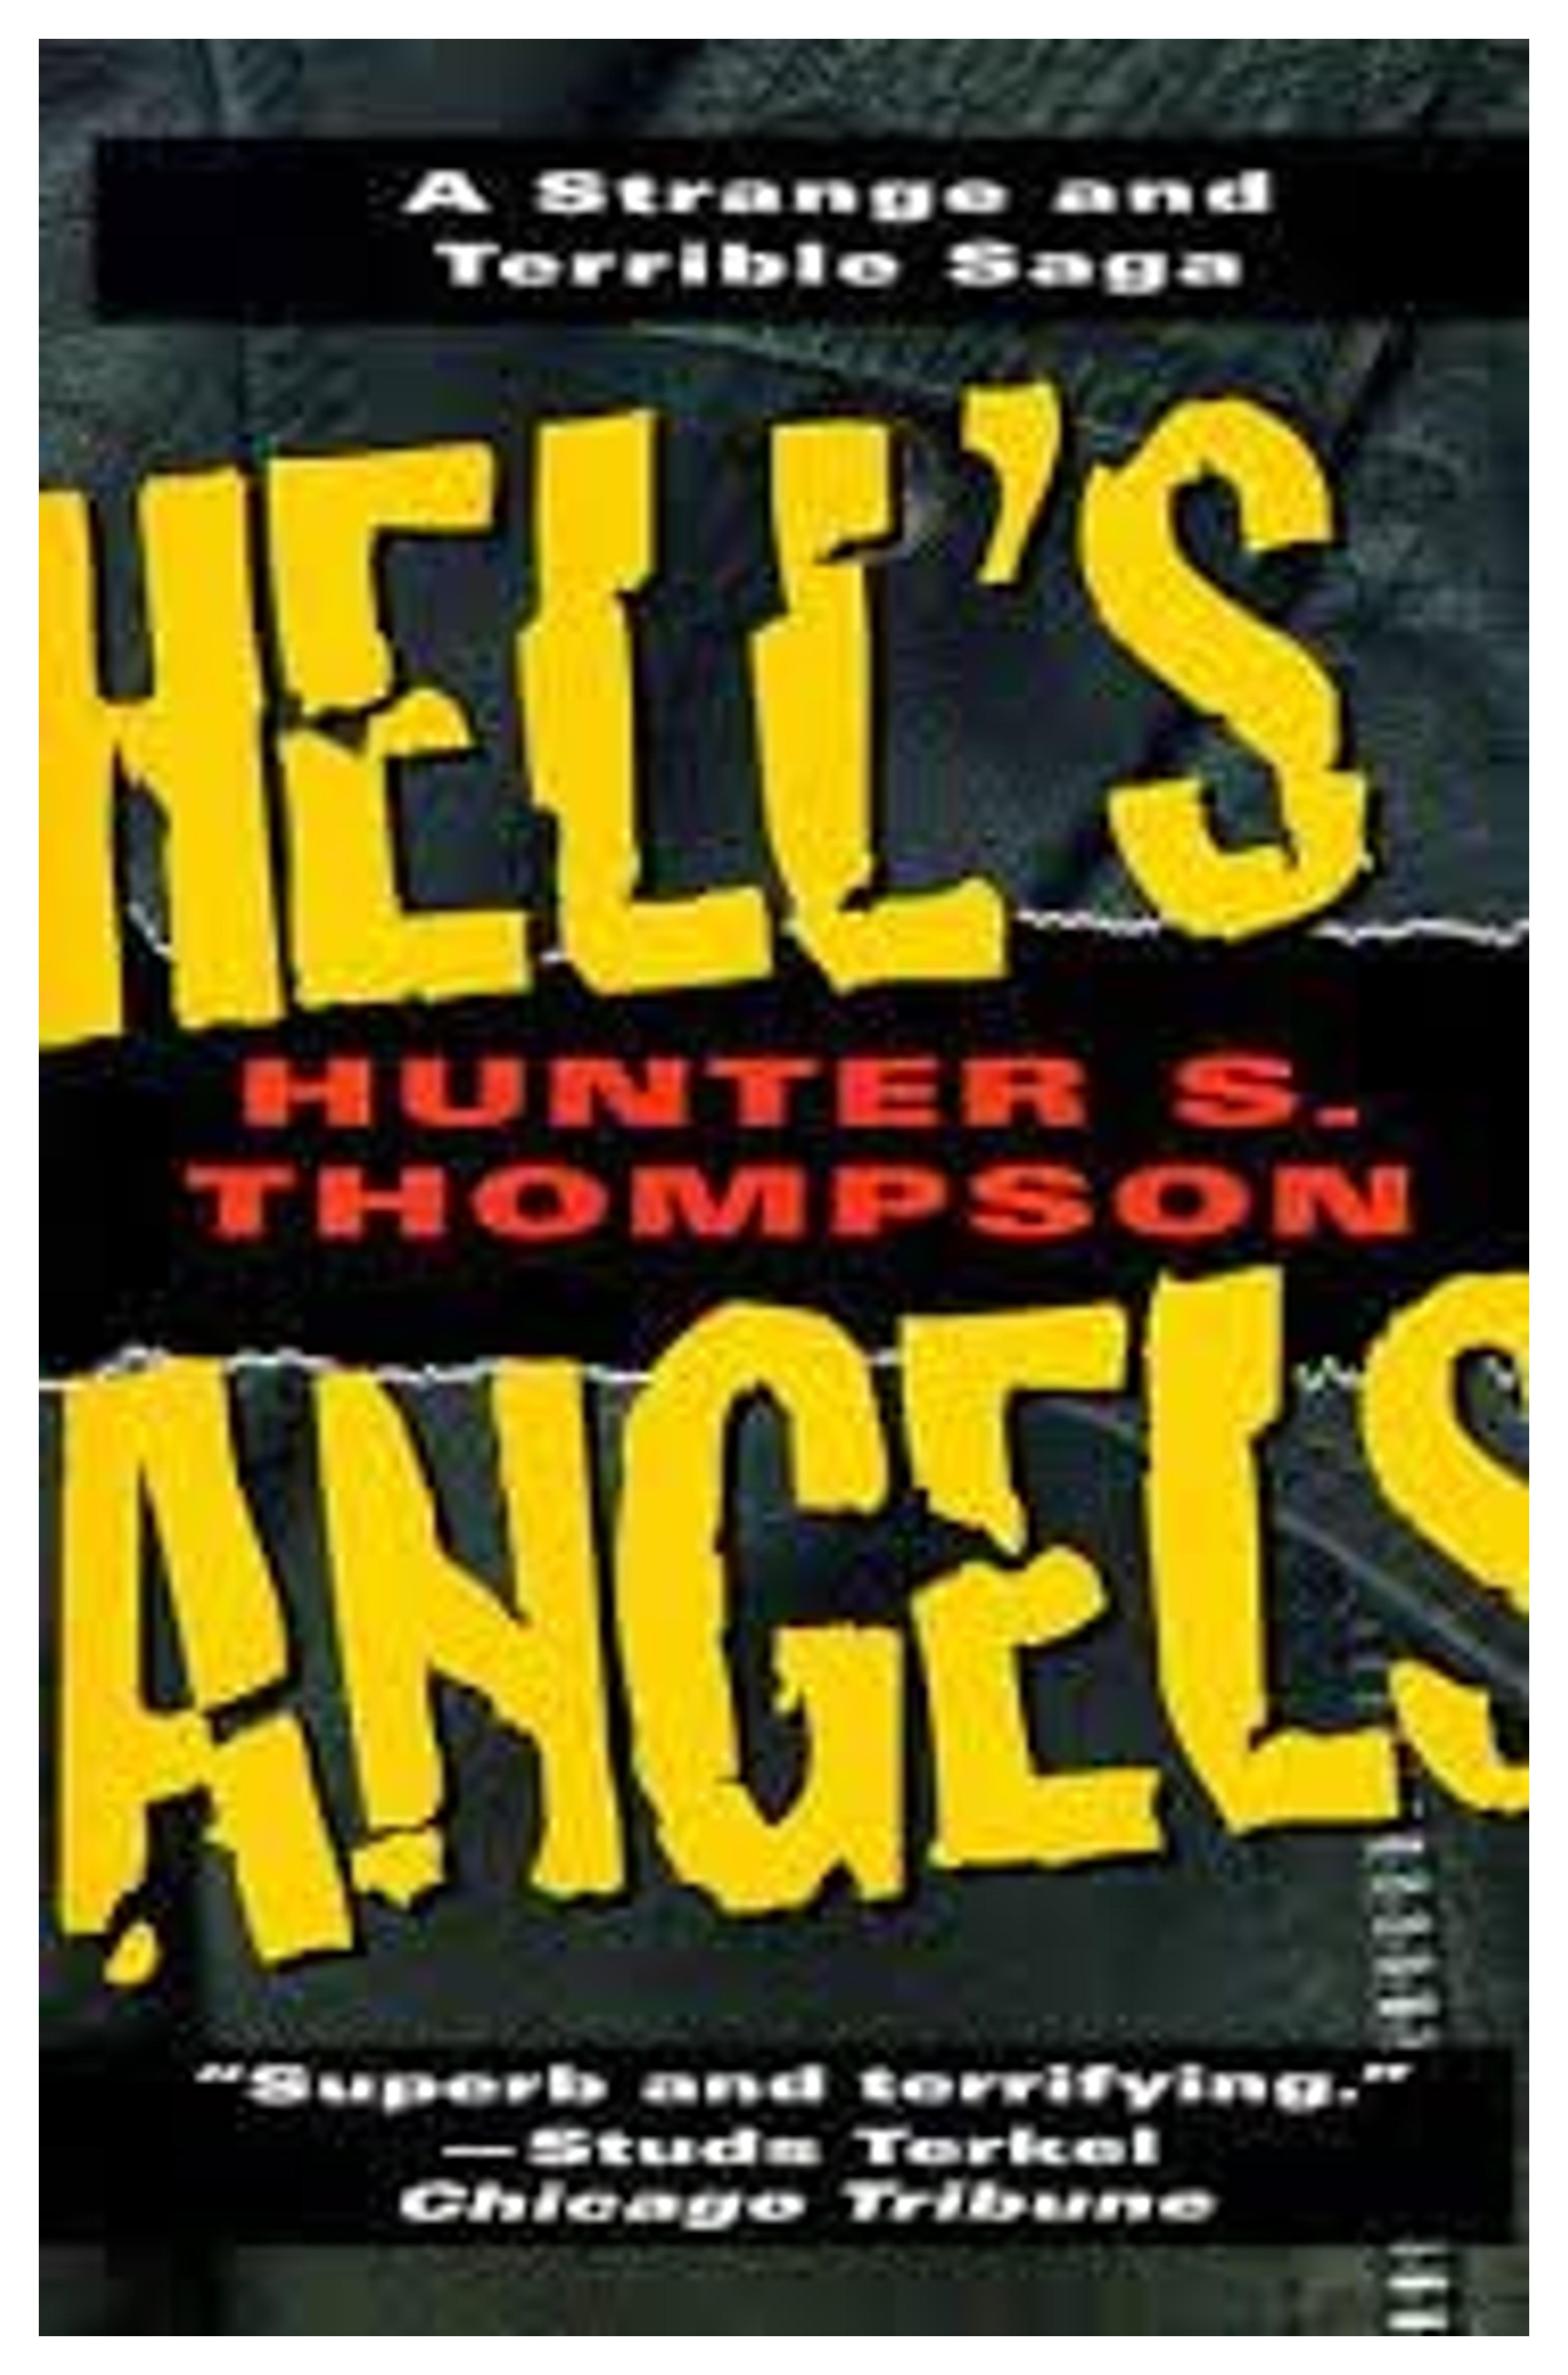 Hunter Thompson's Hell's Angels: The Strange and Terrible Saga of the Outlaw Motorcycle Gangs: Thompson, Hunter S.: Amazon.com: Books